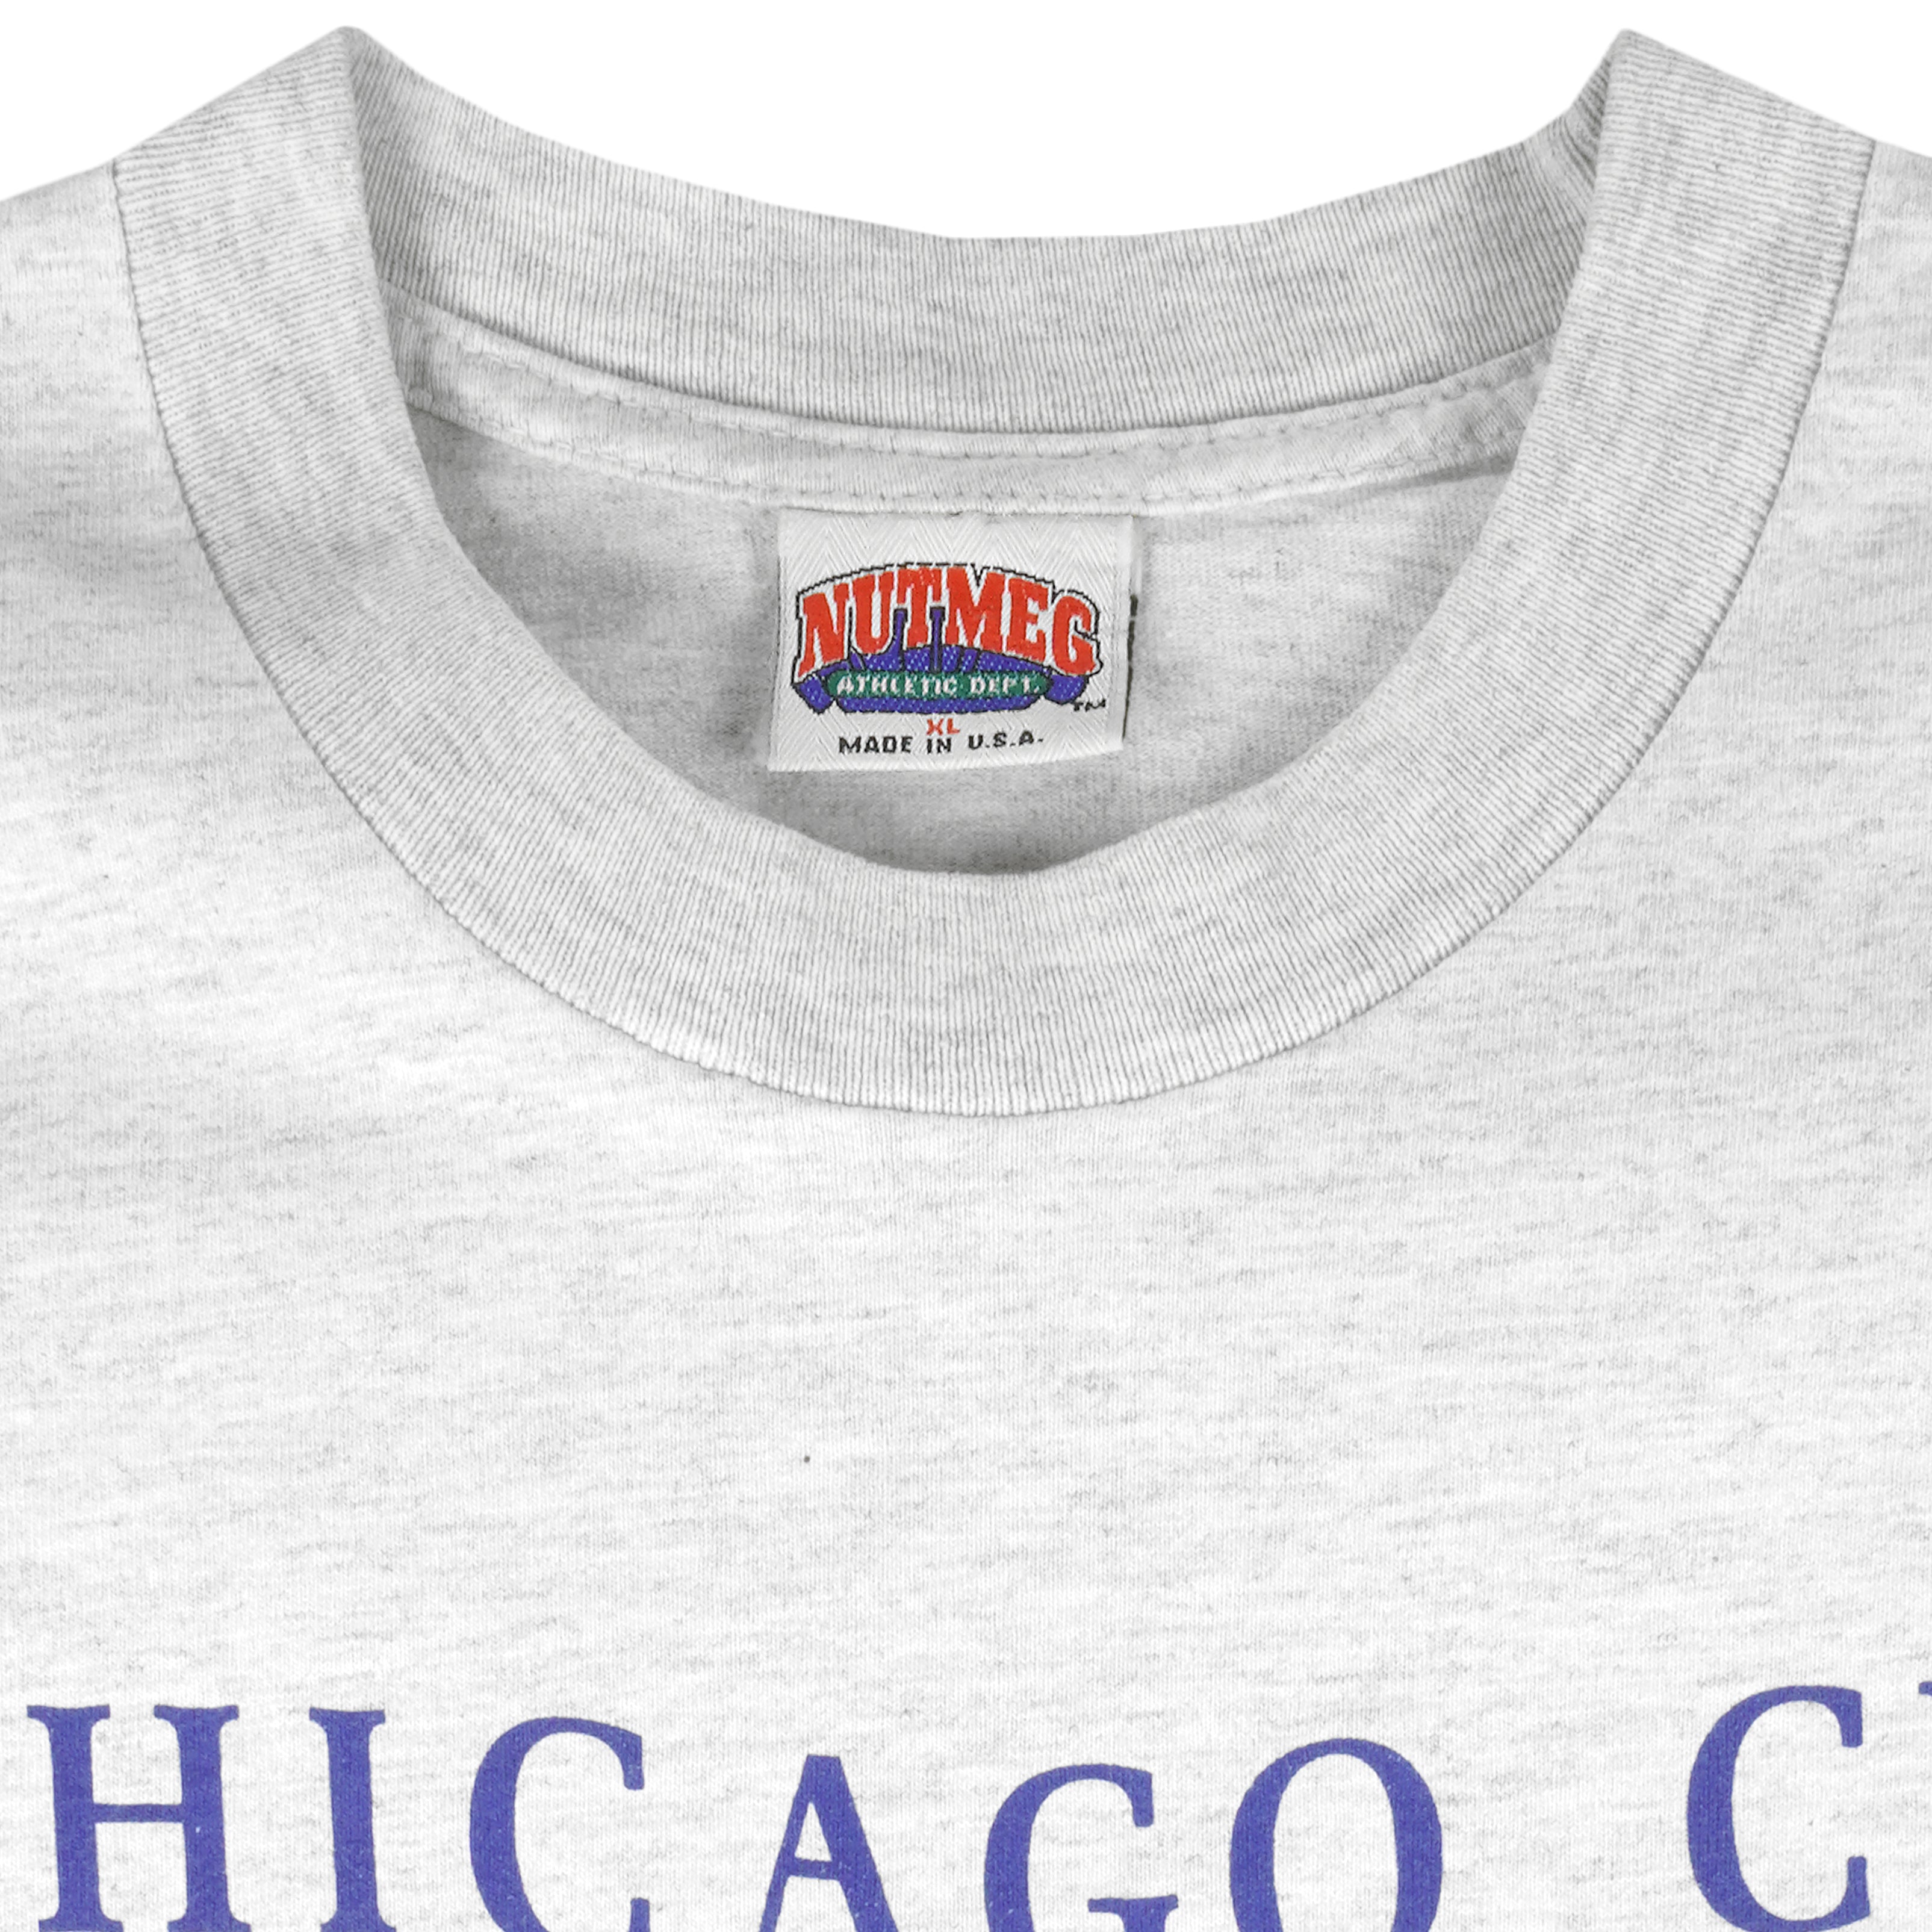 88' Chicago Cubs Vintage T-Shirt NEW